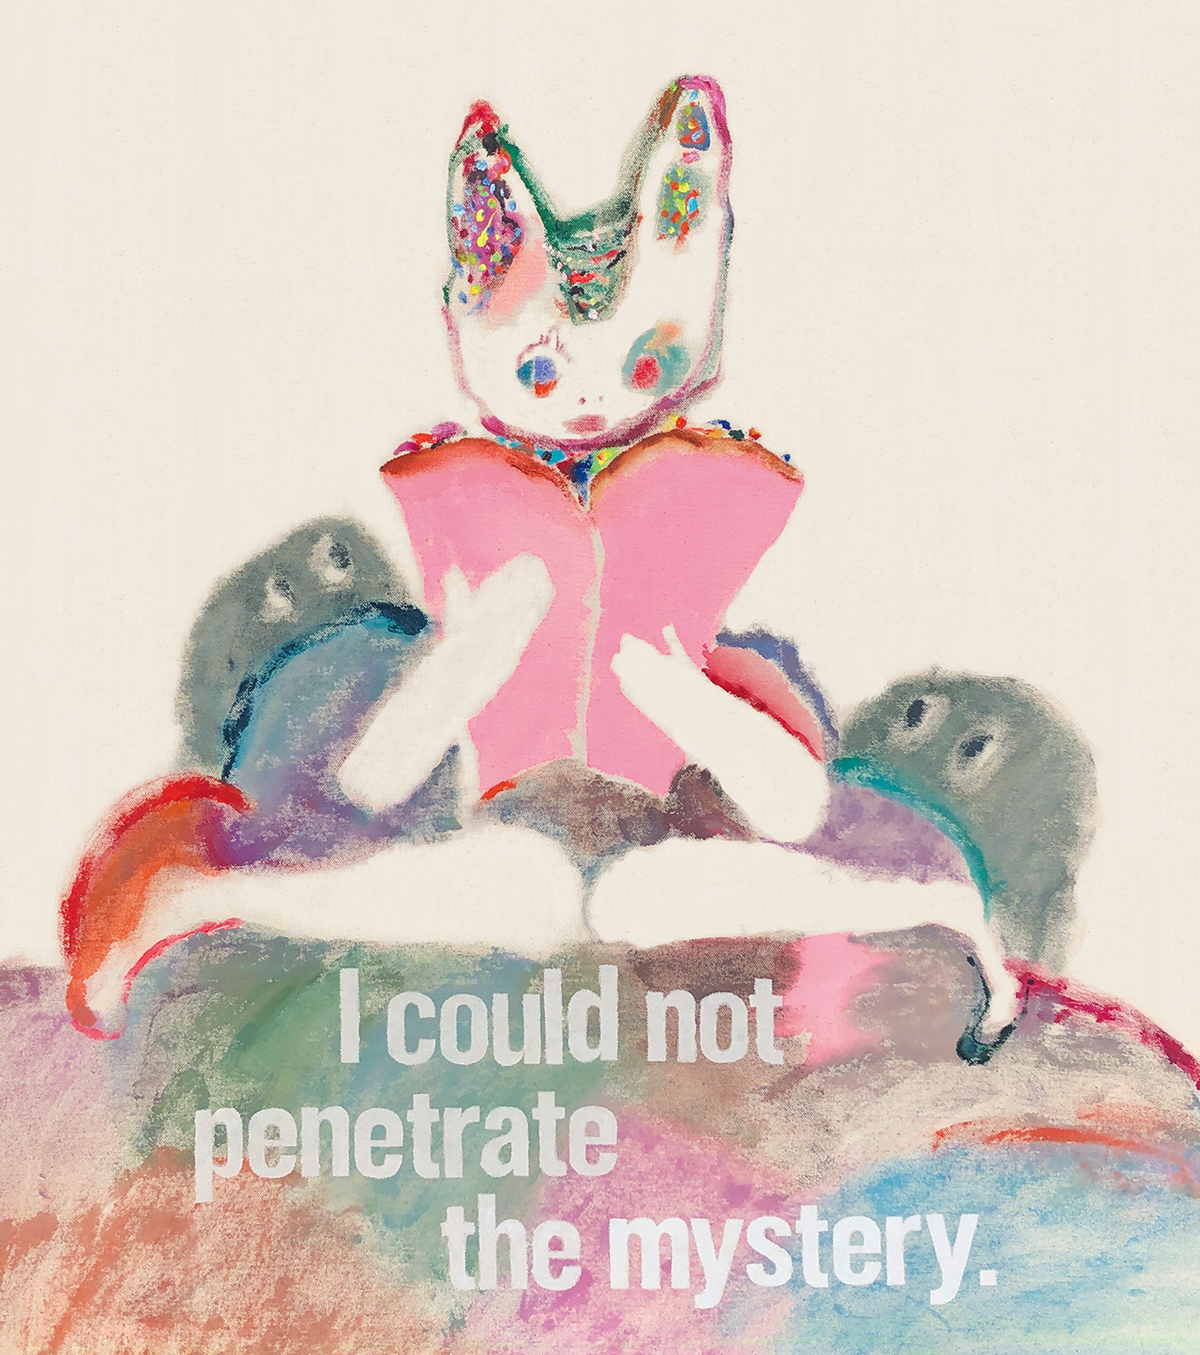 I could not penetrate the mystery. わたしは秘密を見破れなかった。